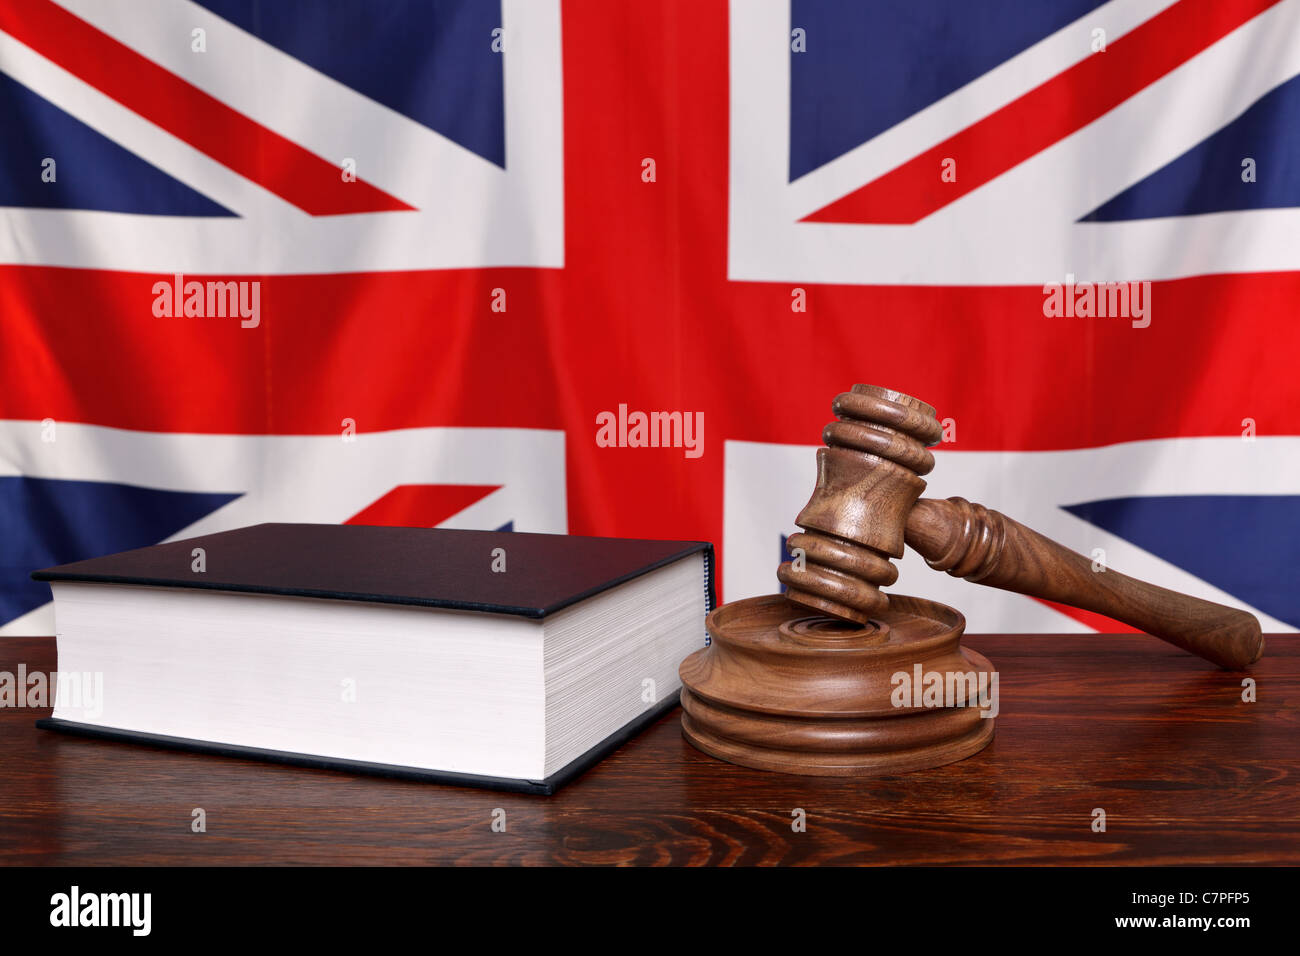 Still life photo of a gavel, block and law book on a judges bench with the United Kingdom union jack flag behind. Stock Photo